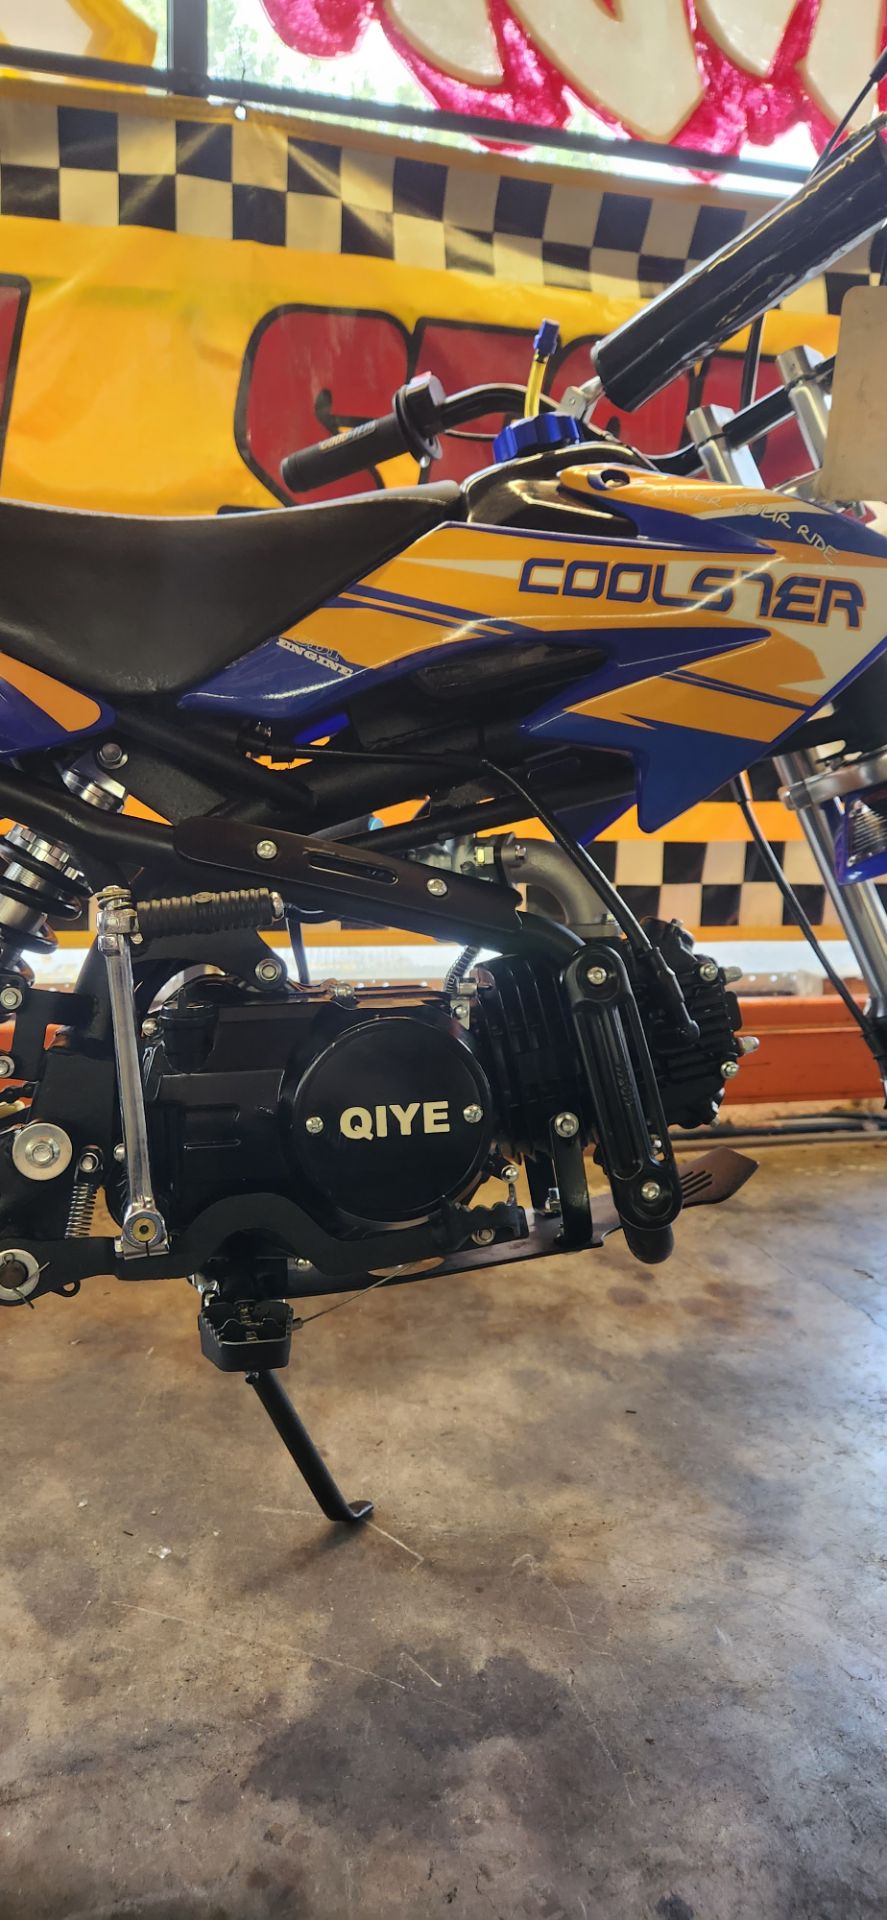 2018 QIYE Coolster Speedmax 99 214 125cc in Forest View, Illinois - Photo 13